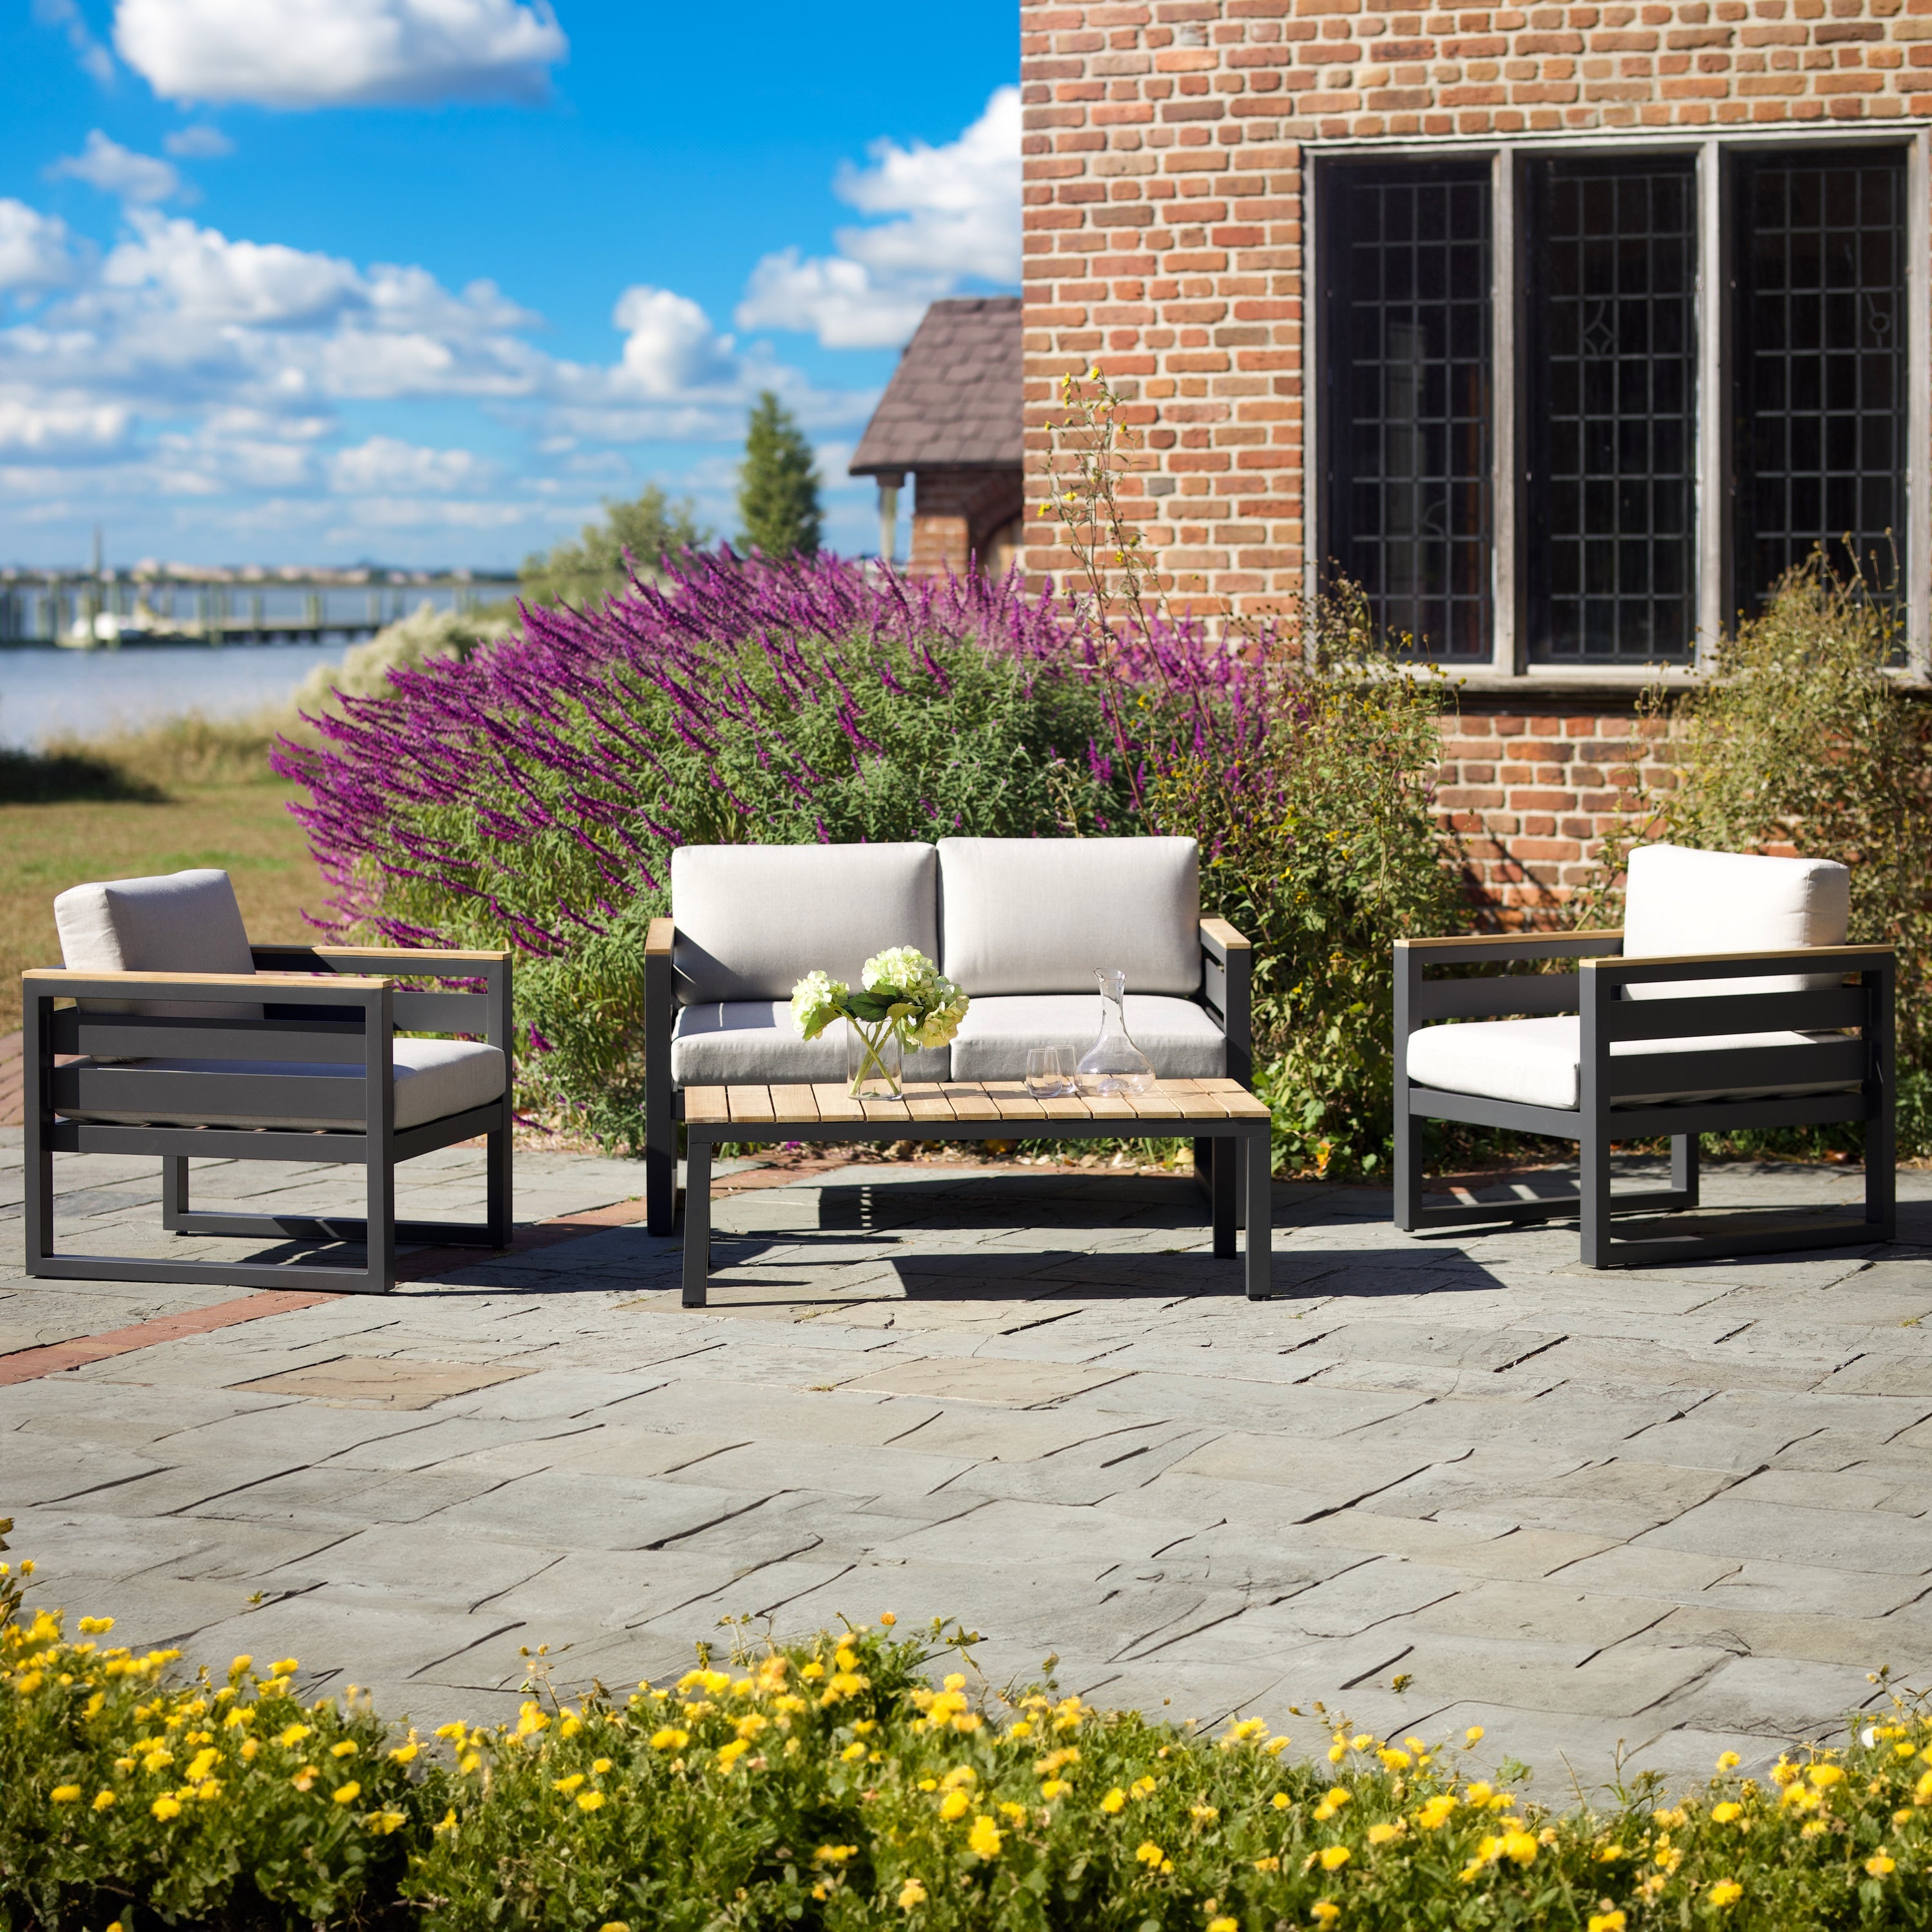 Mix and match the Elba Comfort Collection pieces to create the perfect combination for your patio space.